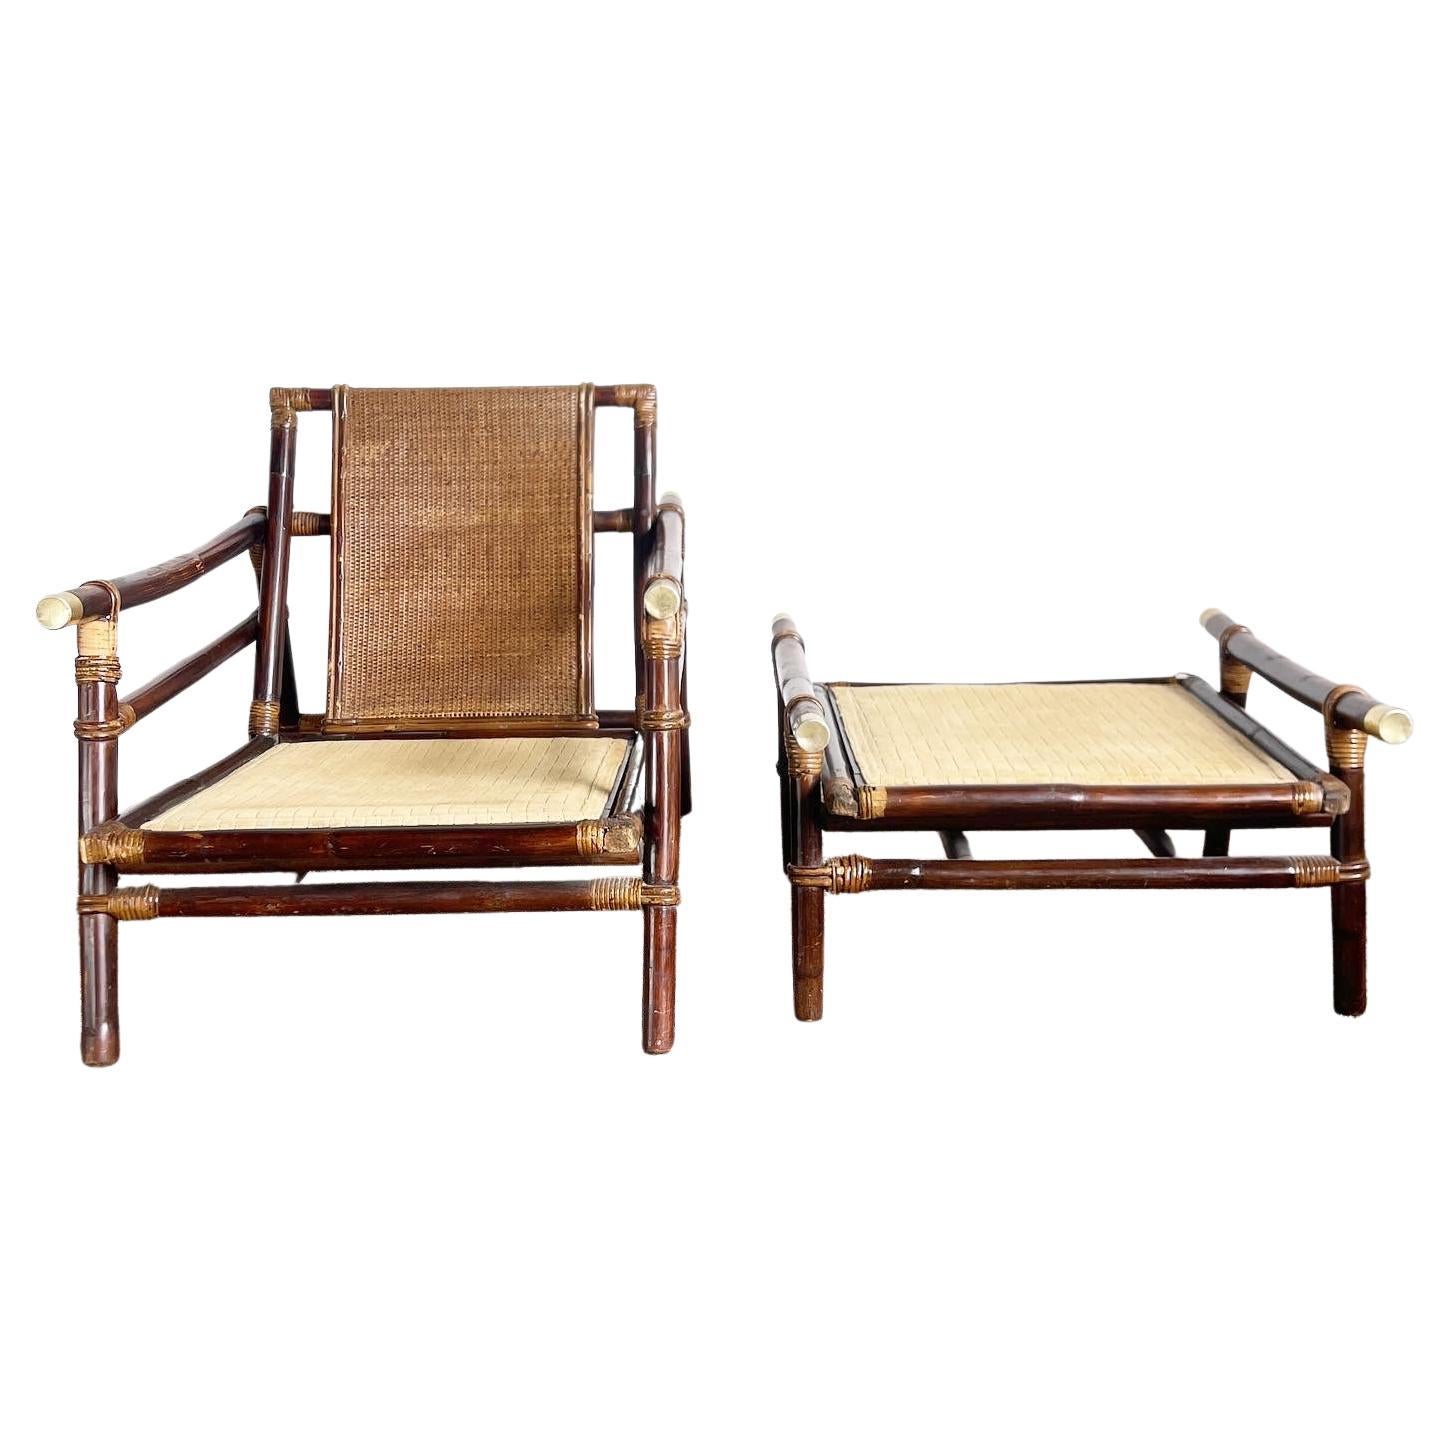 Boho Chic Bamboo Rattan Wicker Lounge Chair and Ottoman by Ficks Reed - 2 Pieces